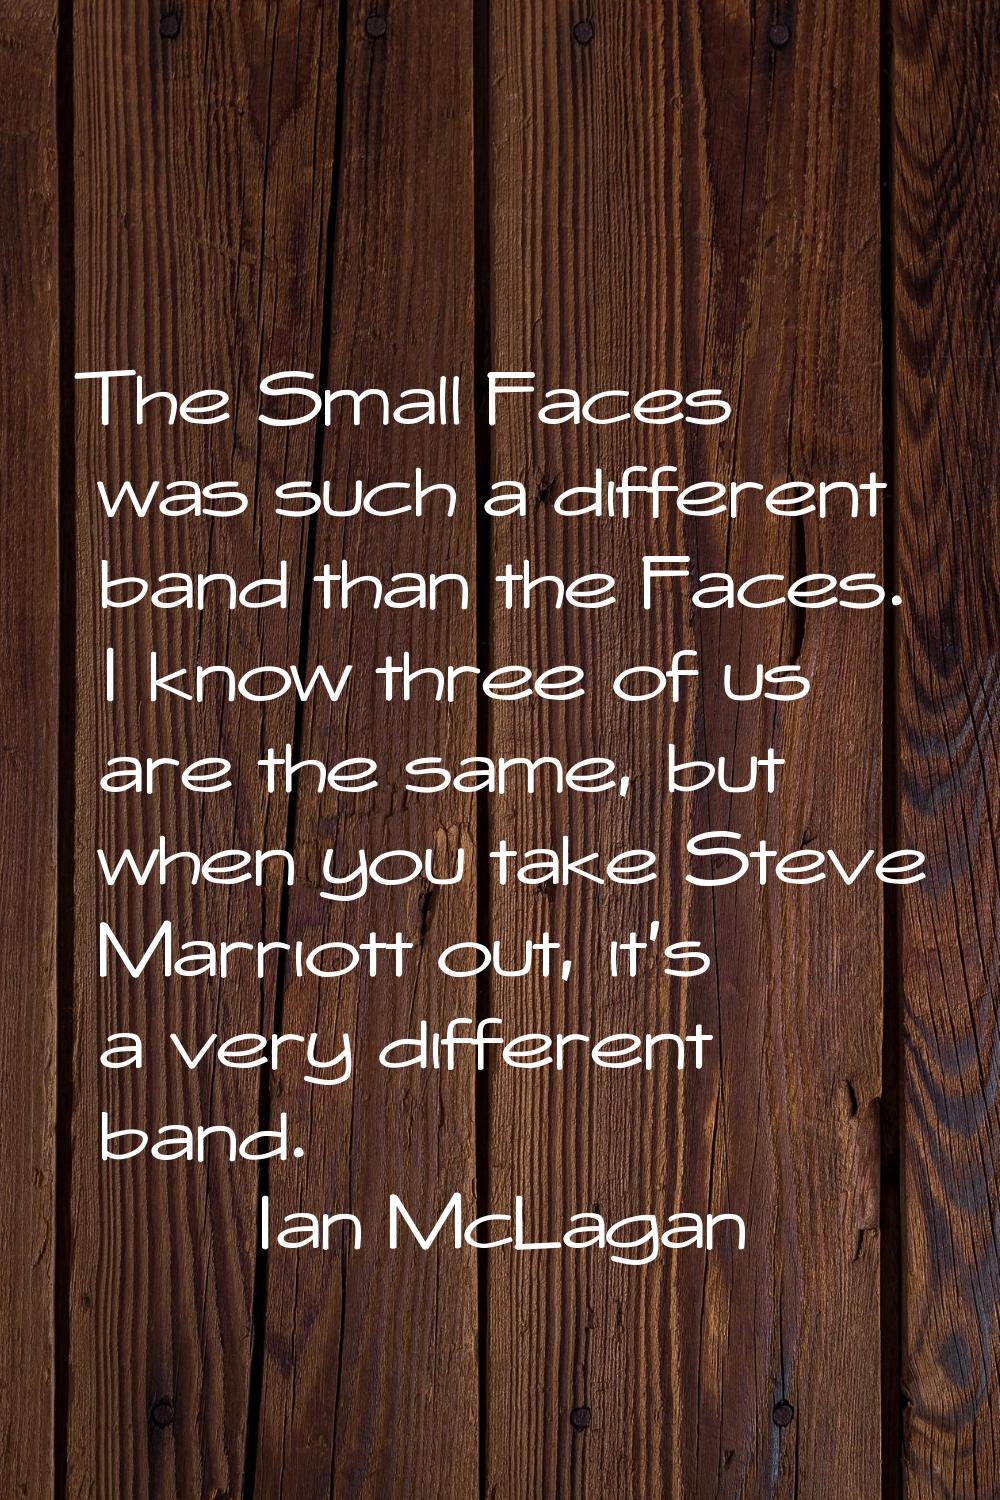 The Small Faces was such a different band than the Faces. I know three of us are the same, but when